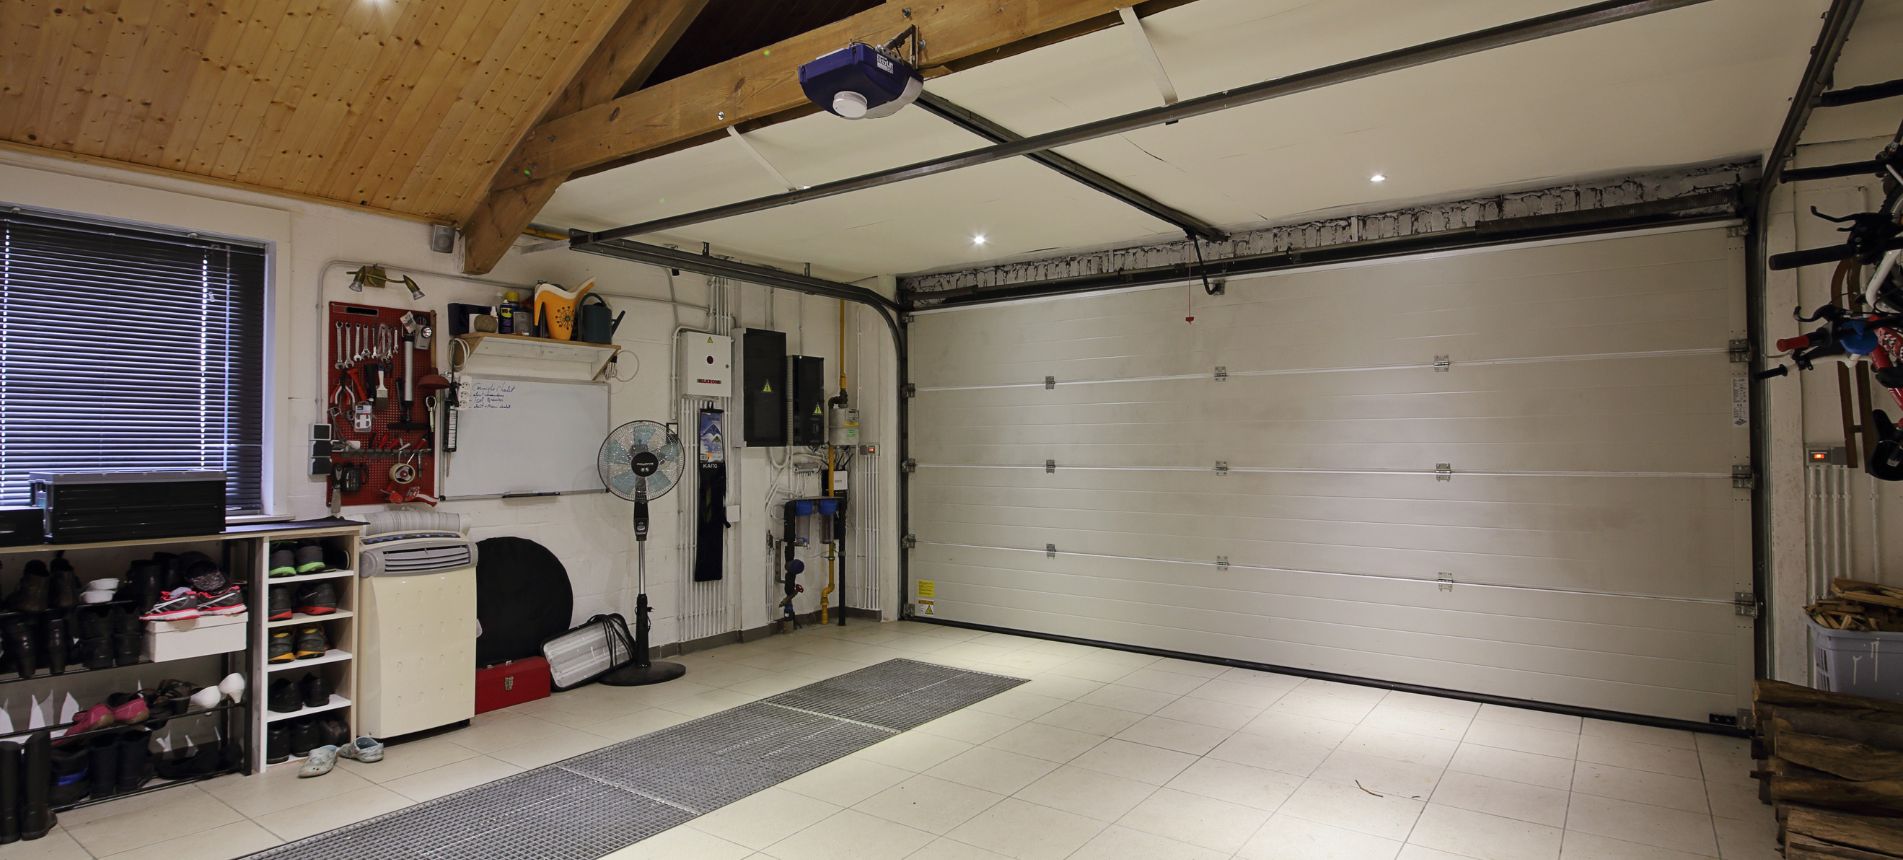 How To Make Your Garage a More Livable Space